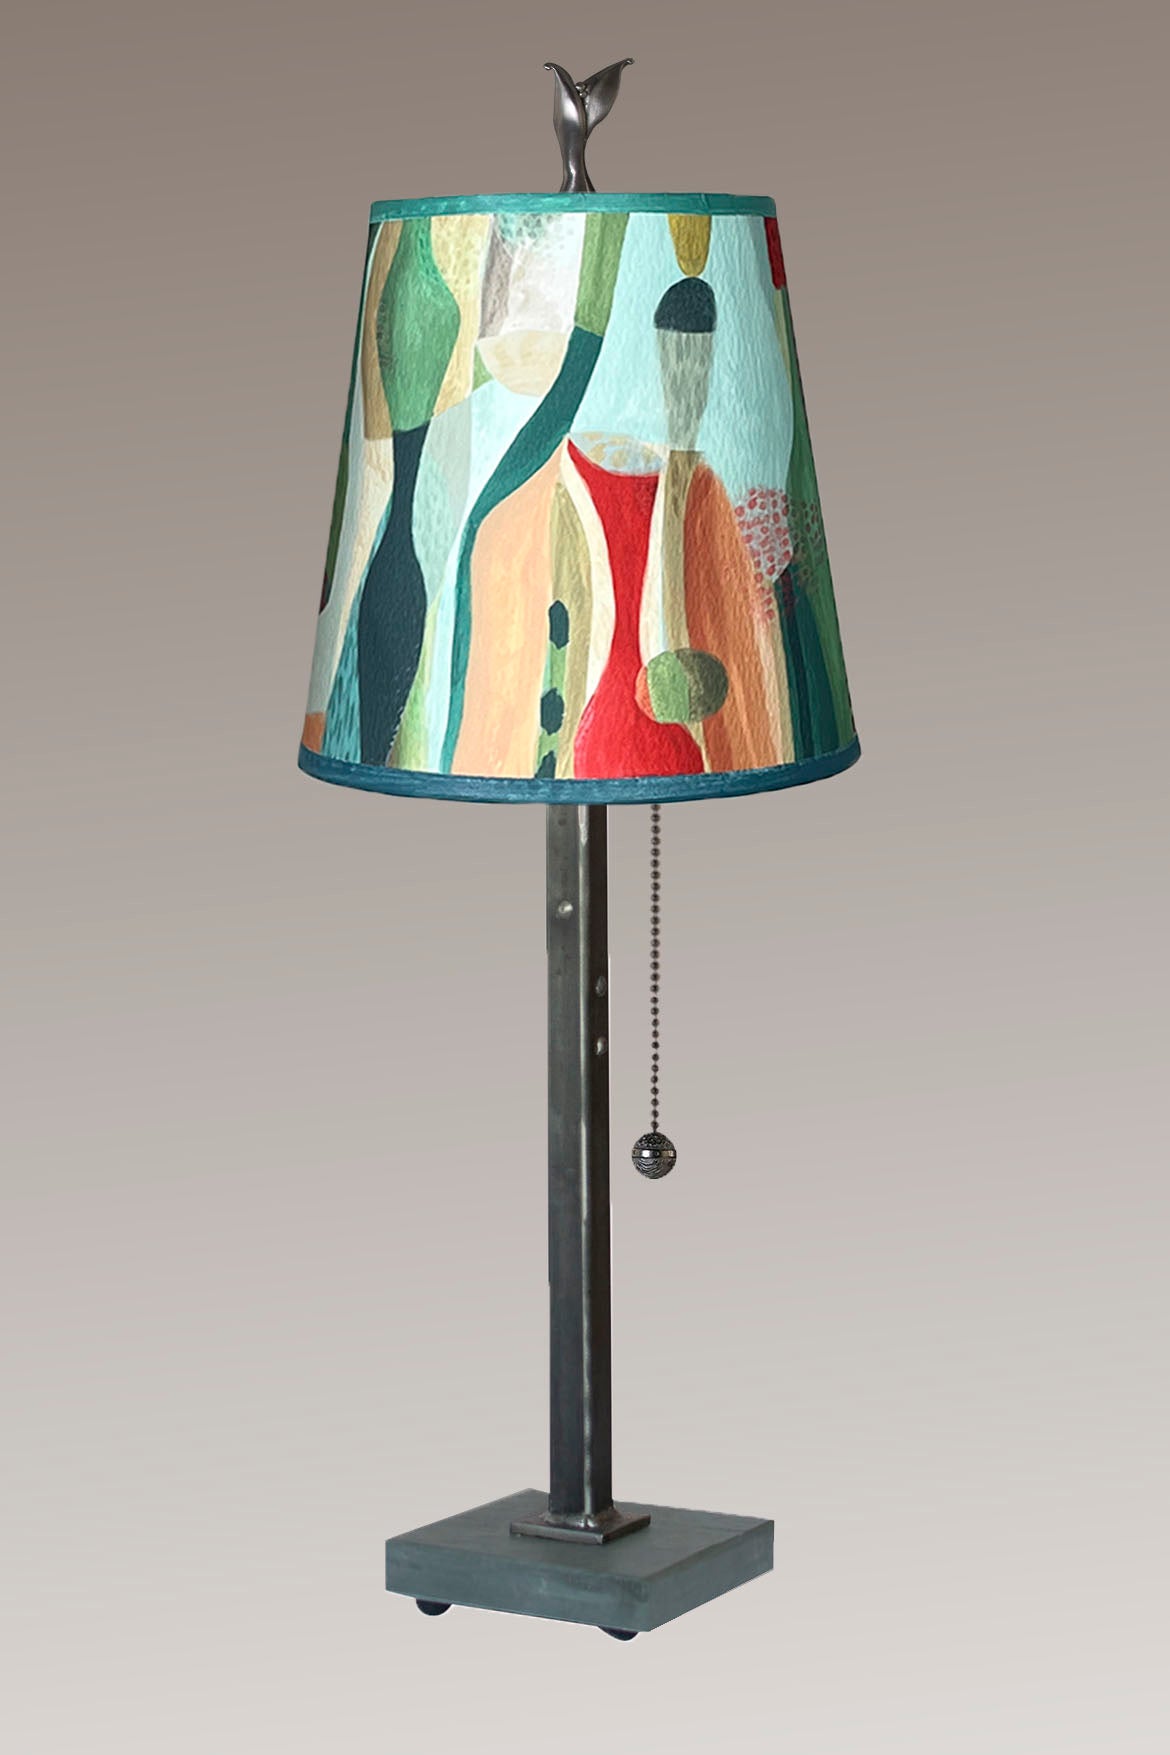 Janna Ugone & Co Table Lamp Steel Table Lamp with Small Drum Shade in Riviera in Poppy